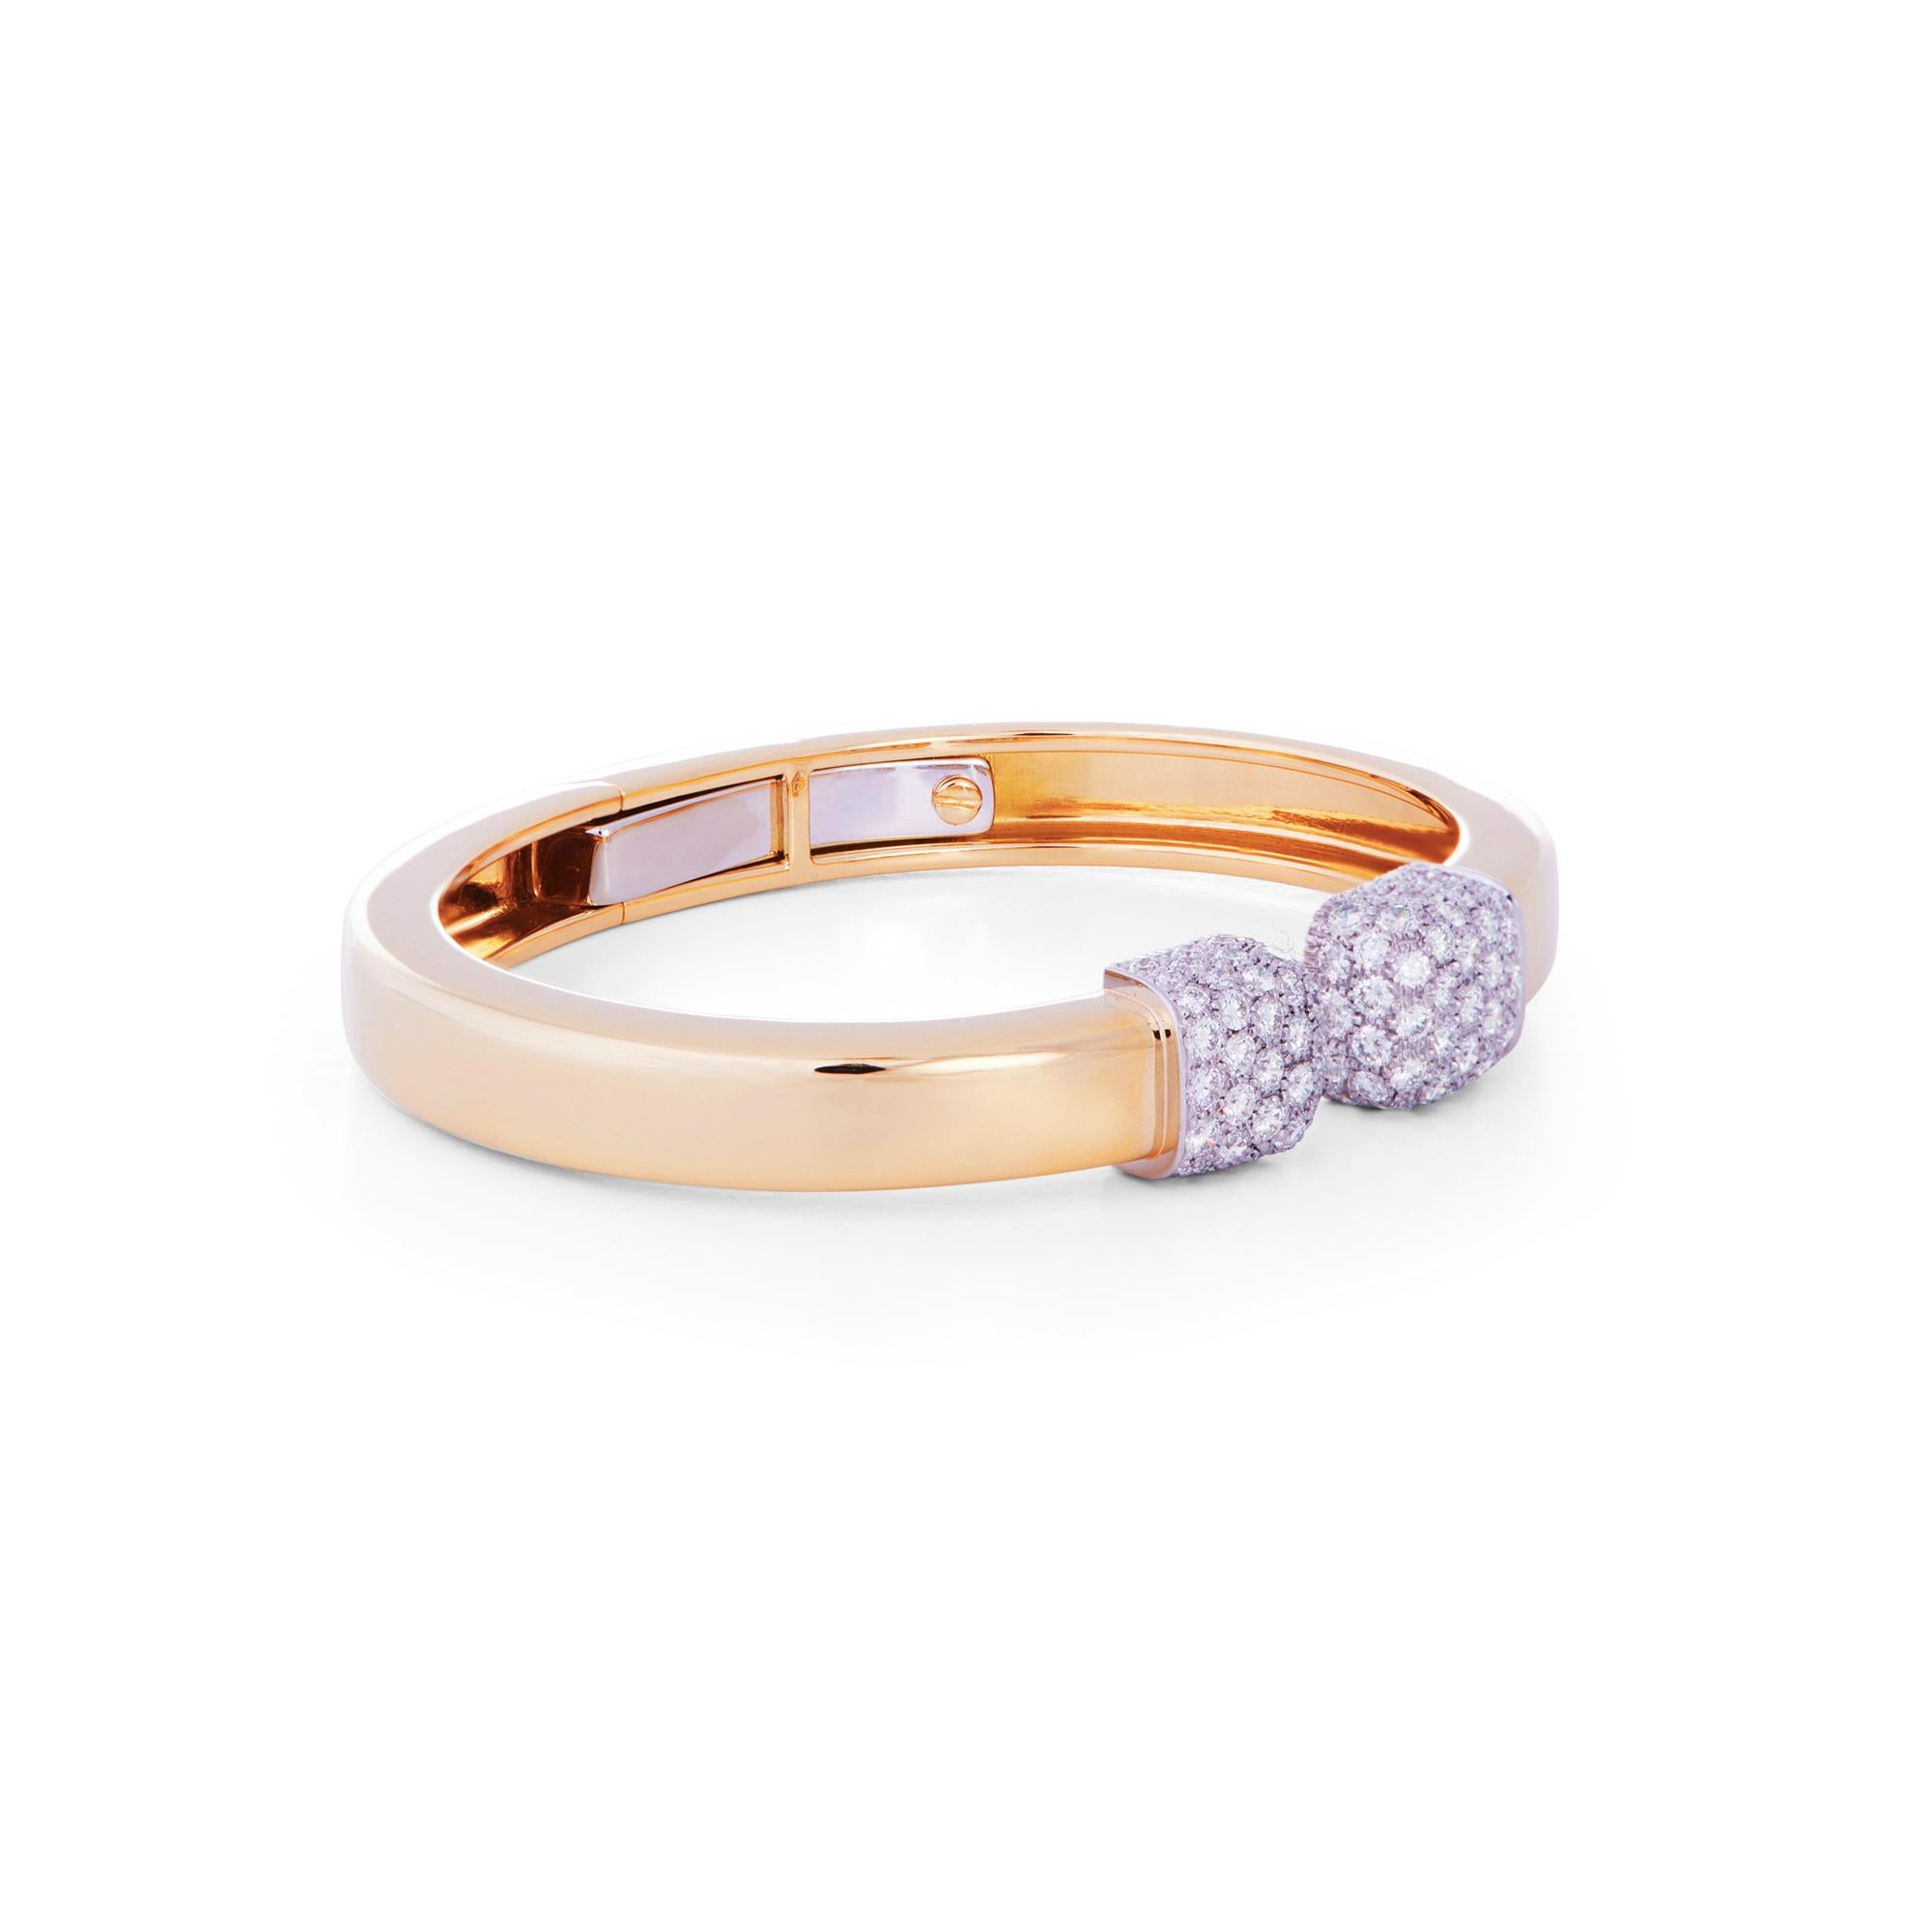 Authentic David Webb Sugar Cube bracelet crafted in 18 karat gold.  The hinged bangle is finished by diamond-set platinum ends for an estimated 2.75 carats total weight. The bracelet measures .39 inches at the widest point with a 6 inch internal